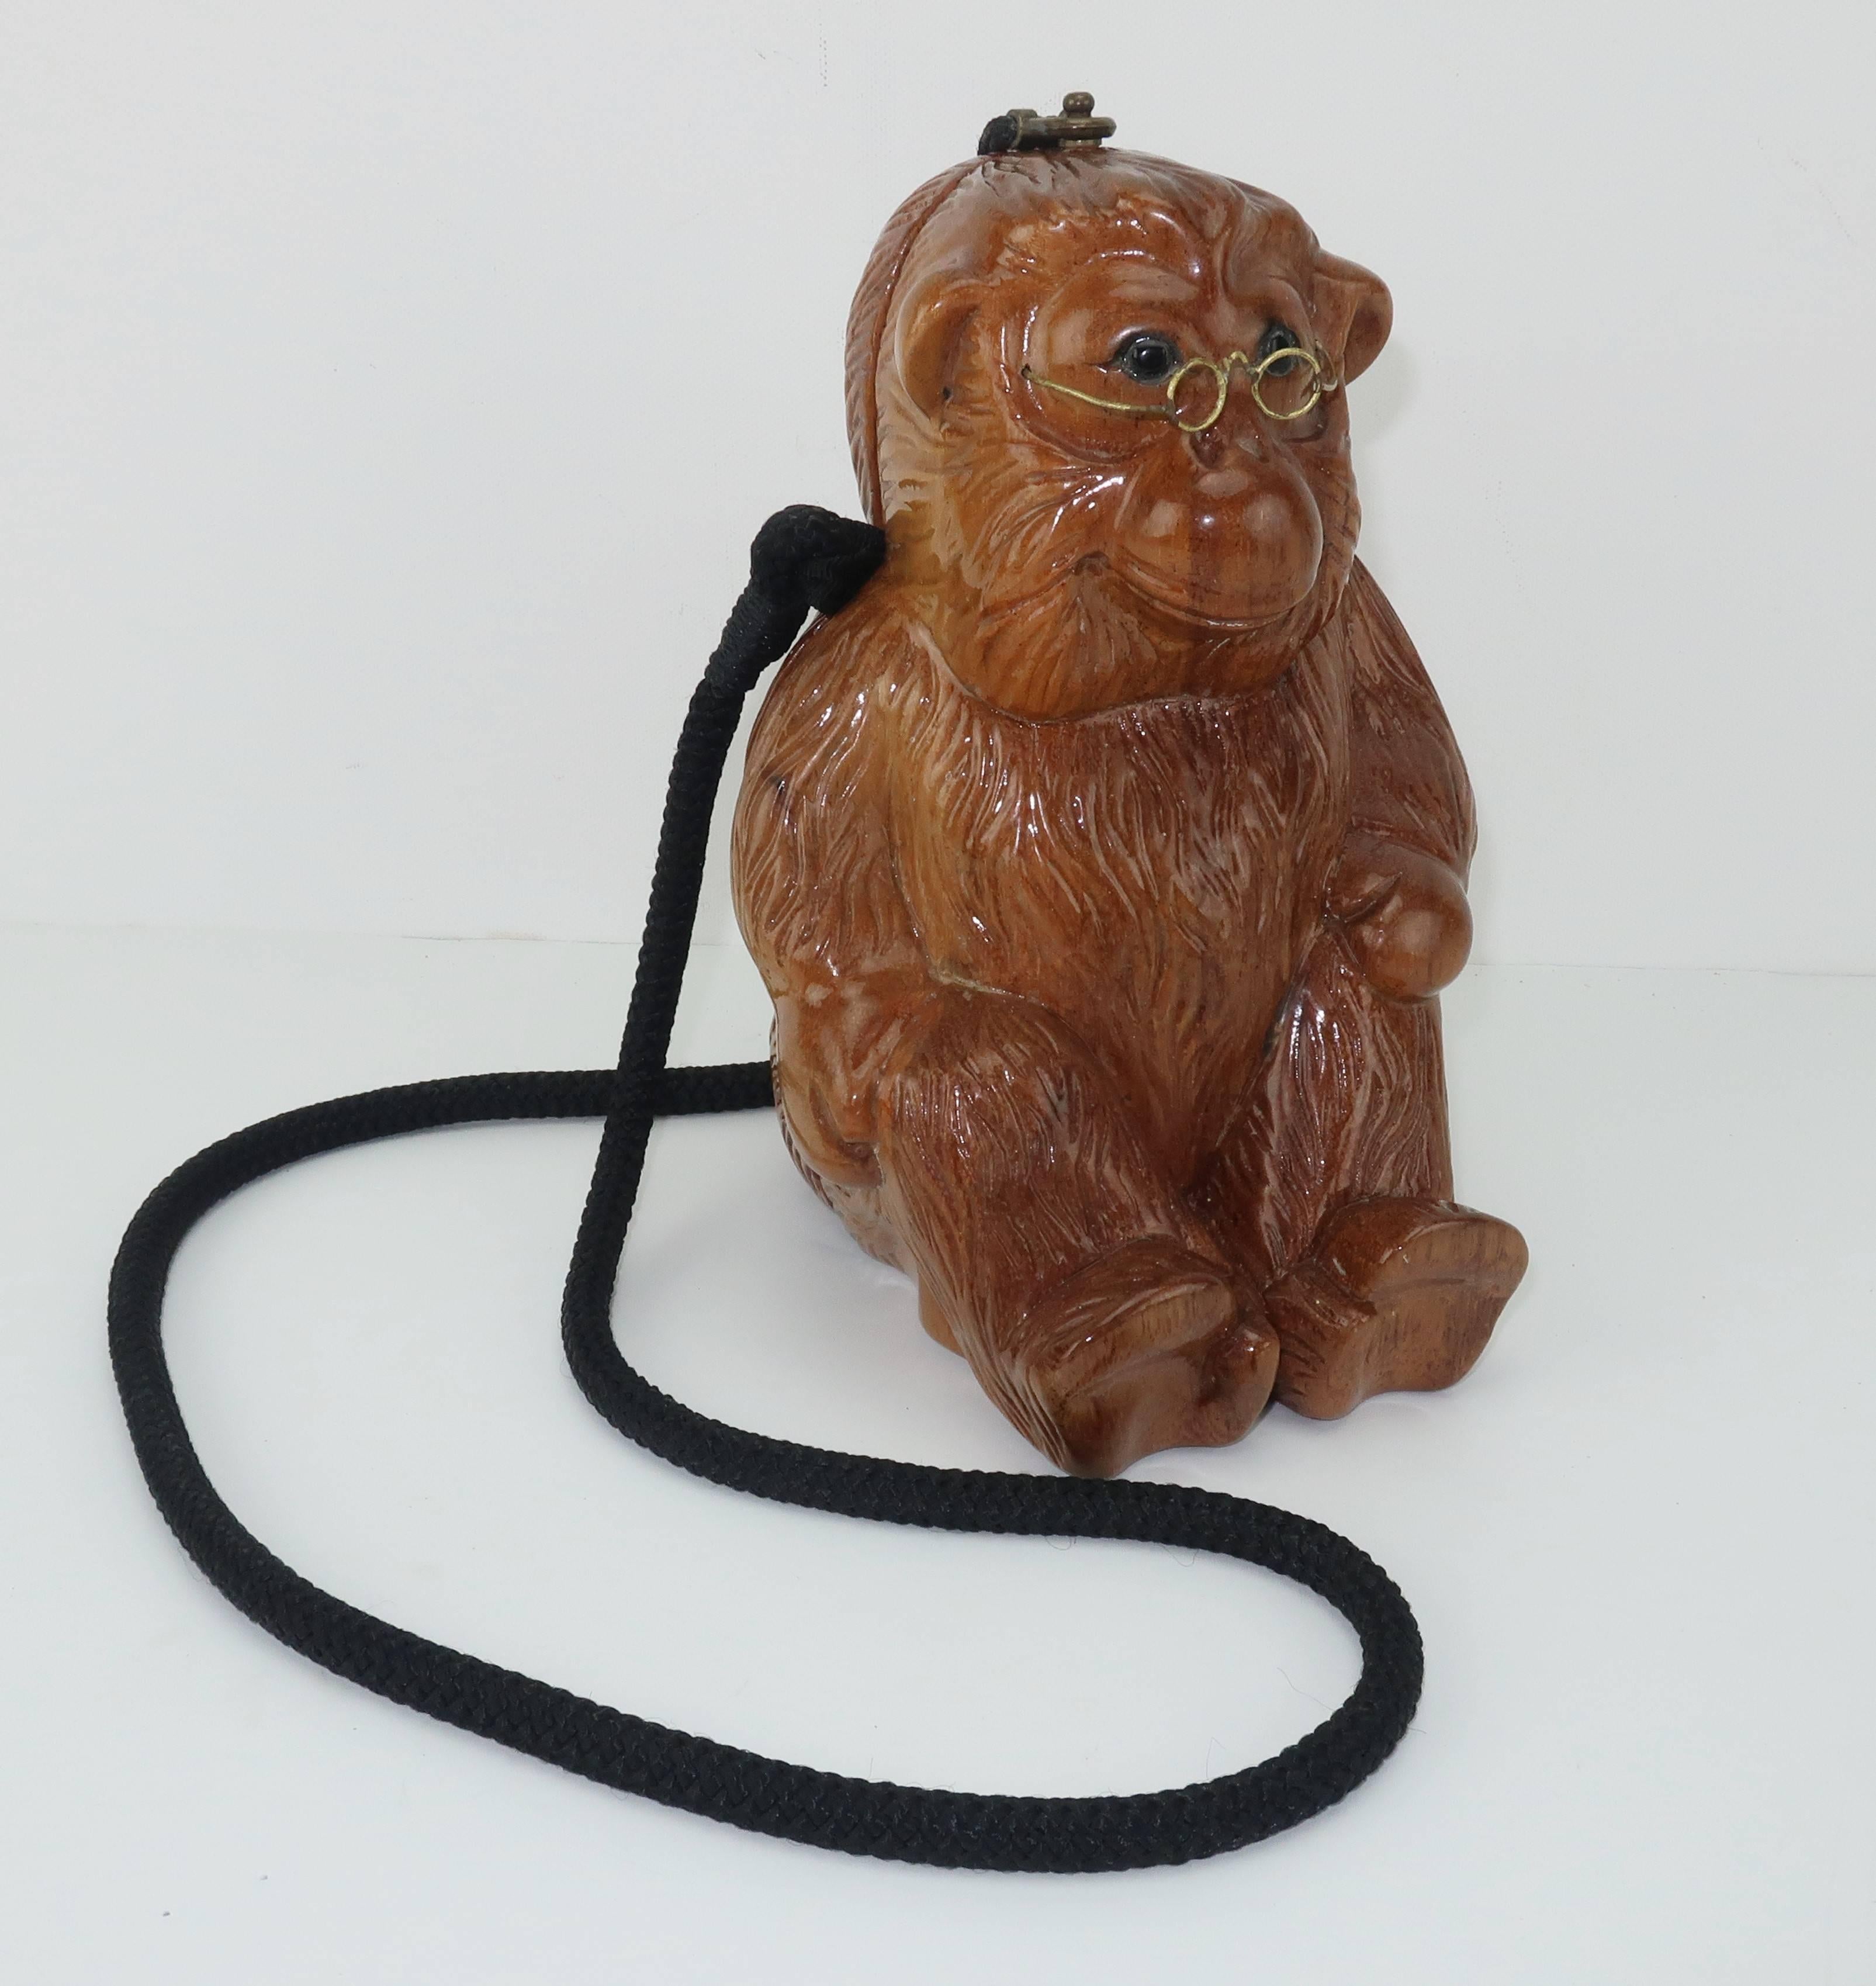 Witty ... whimsical ... wearable art ... AND wooden!  This vintage Timmy Woods of Beverly Hills carved wood monkey handbag is sure to bring a smile.  The little guy is in a seated position with intricate carving which replicates fur.  He is also